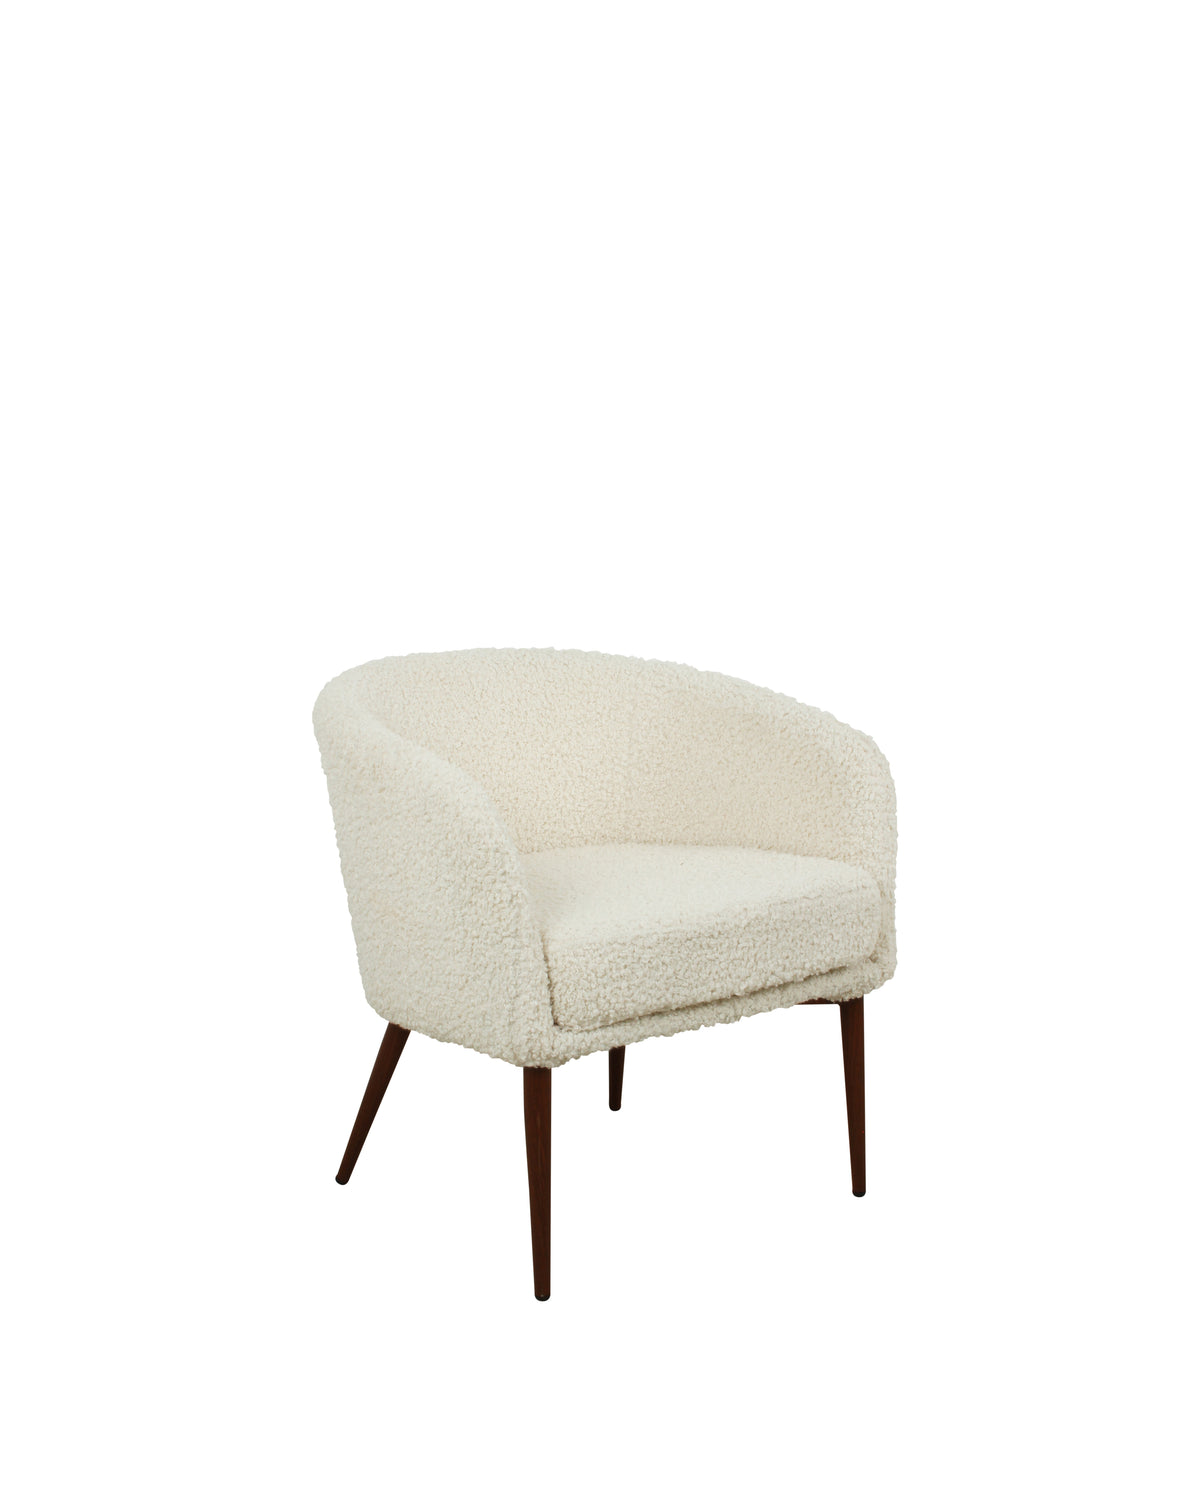 WHITE FAUX SHERPA OCCASIONAL CHAIR, 70X65X65CM